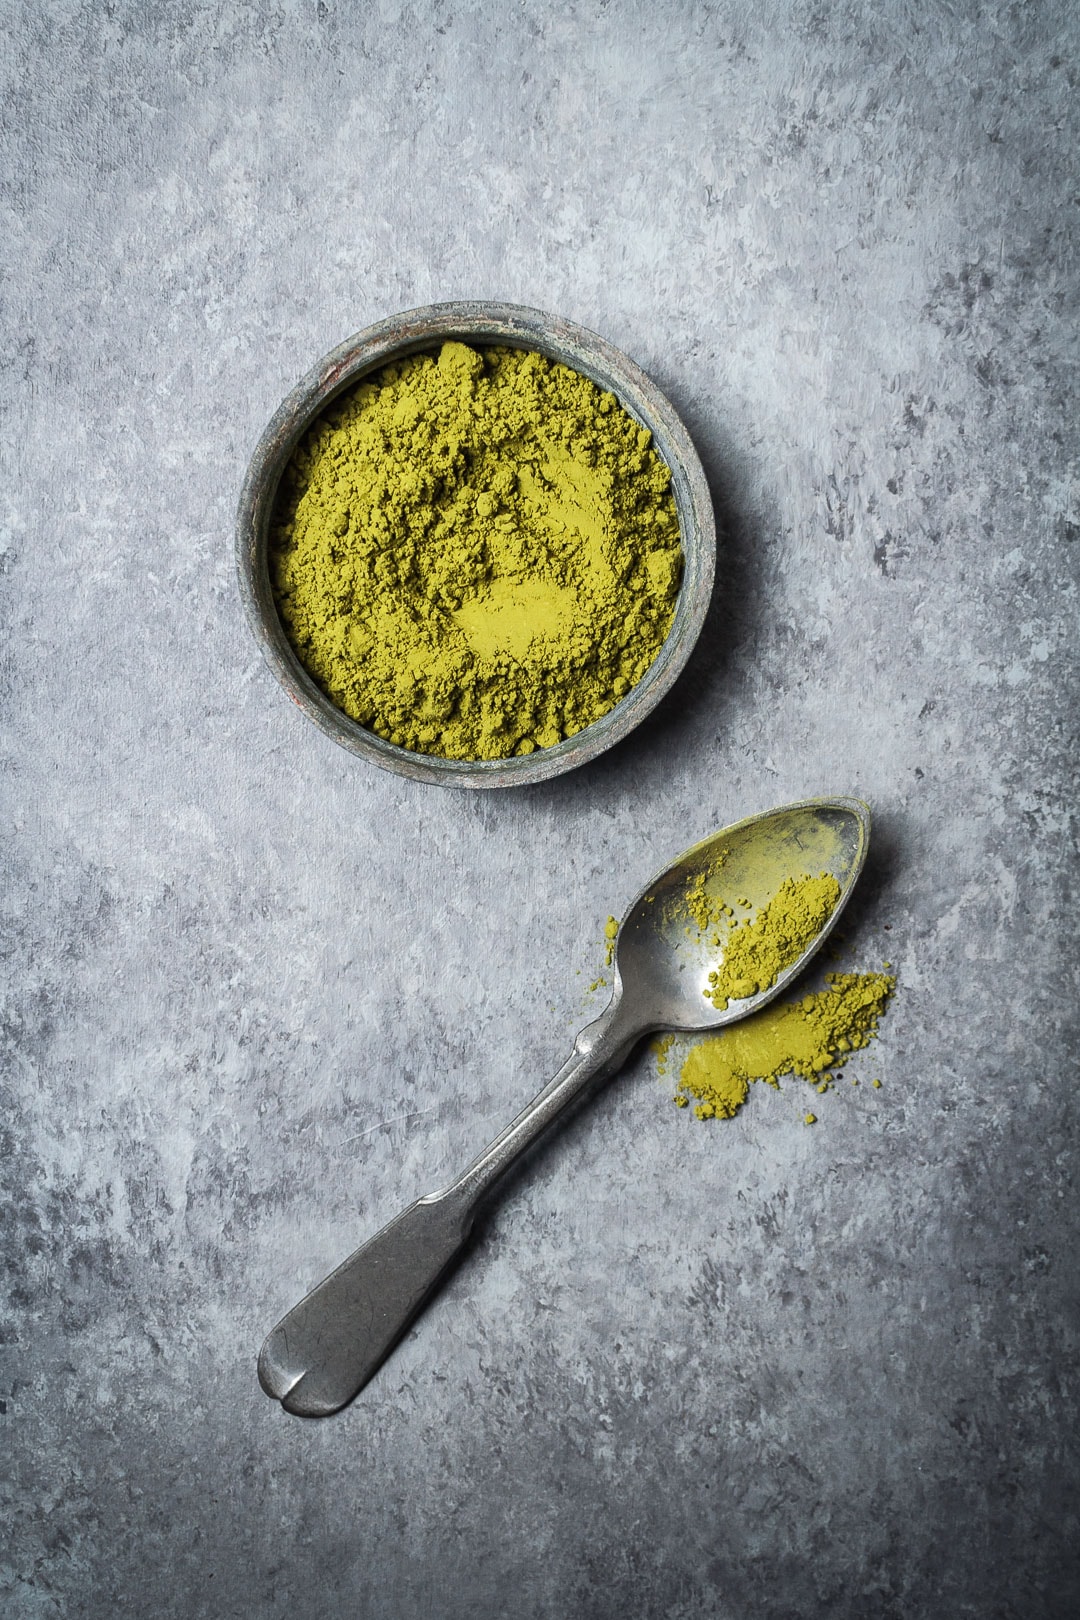 Matcha green tea powder in a grey container on a grey background with spoon nearby - recipe for Mint Matcha Chocolate Thumbprint Cookies